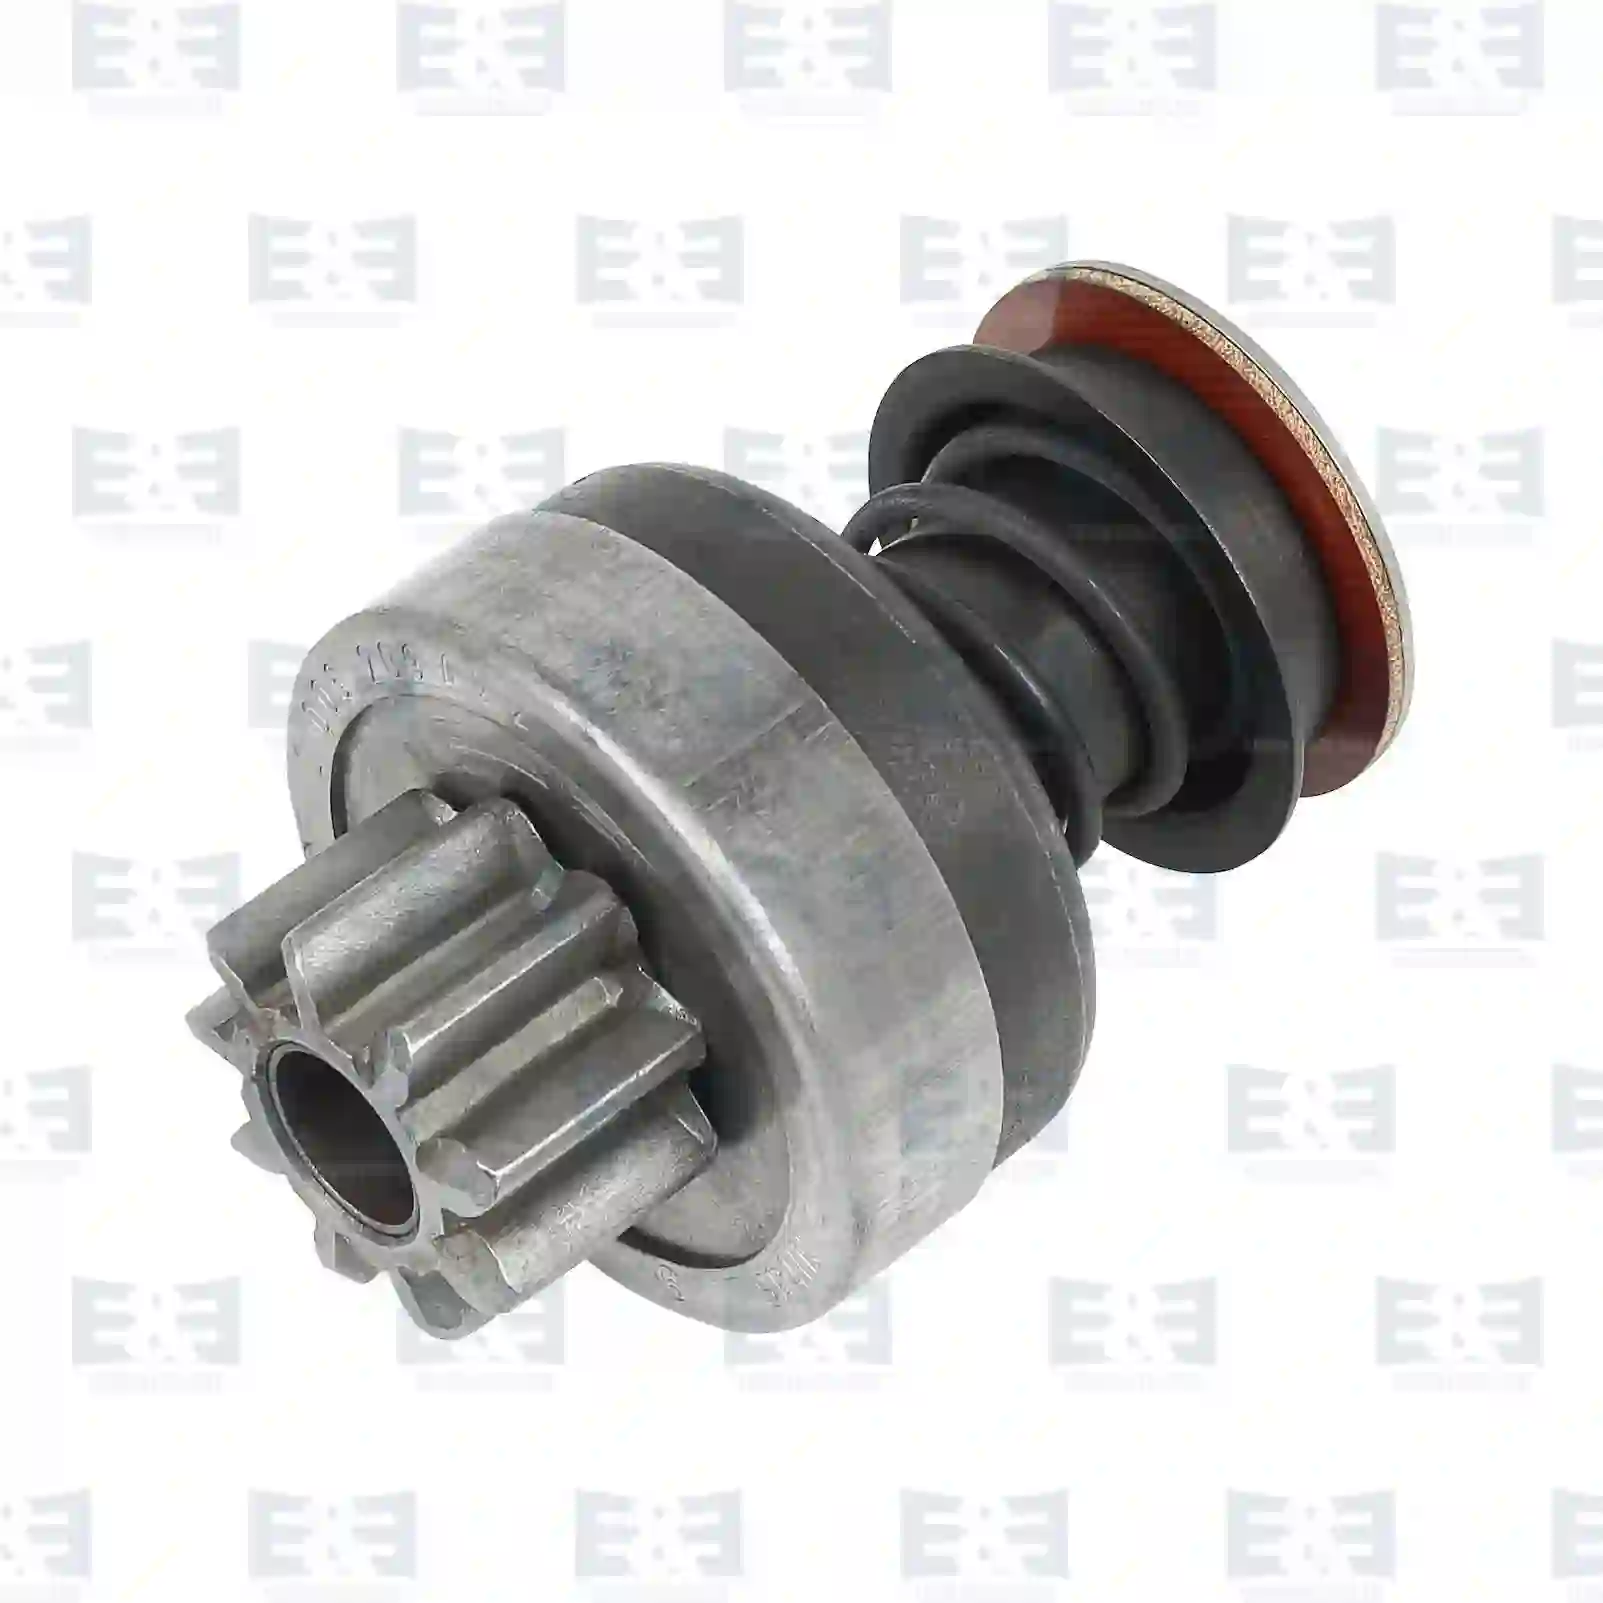 Starter Motor Freewheel gear, starter, EE No 2E2290476 ,  oem no:08122129, 4791077, X830100004011, 3079249R91, 08122129, 01171929, 01310682, 81262090016, 0001516613, 606902430822, T2139385, 5000589686, 296190915, 301933, 009926112 E&E Truck Spare Parts | Truck Spare Parts, Auotomotive Spare Parts